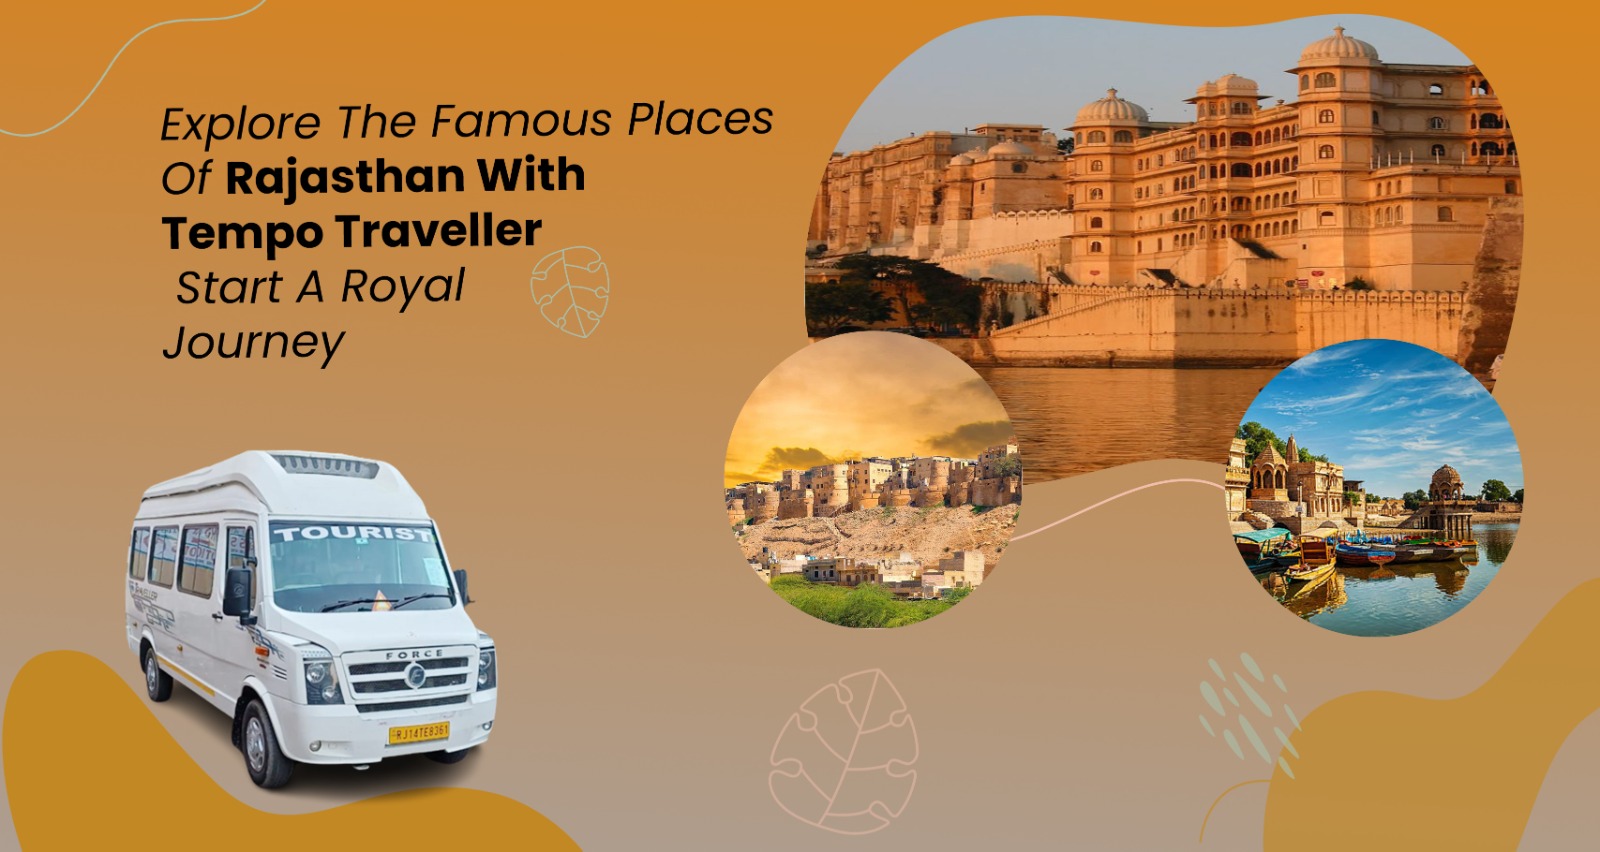 explore-the-Famous-Places-of-Rajasthan-with-Tempo-Traveller-Start-a-Royal-Journey